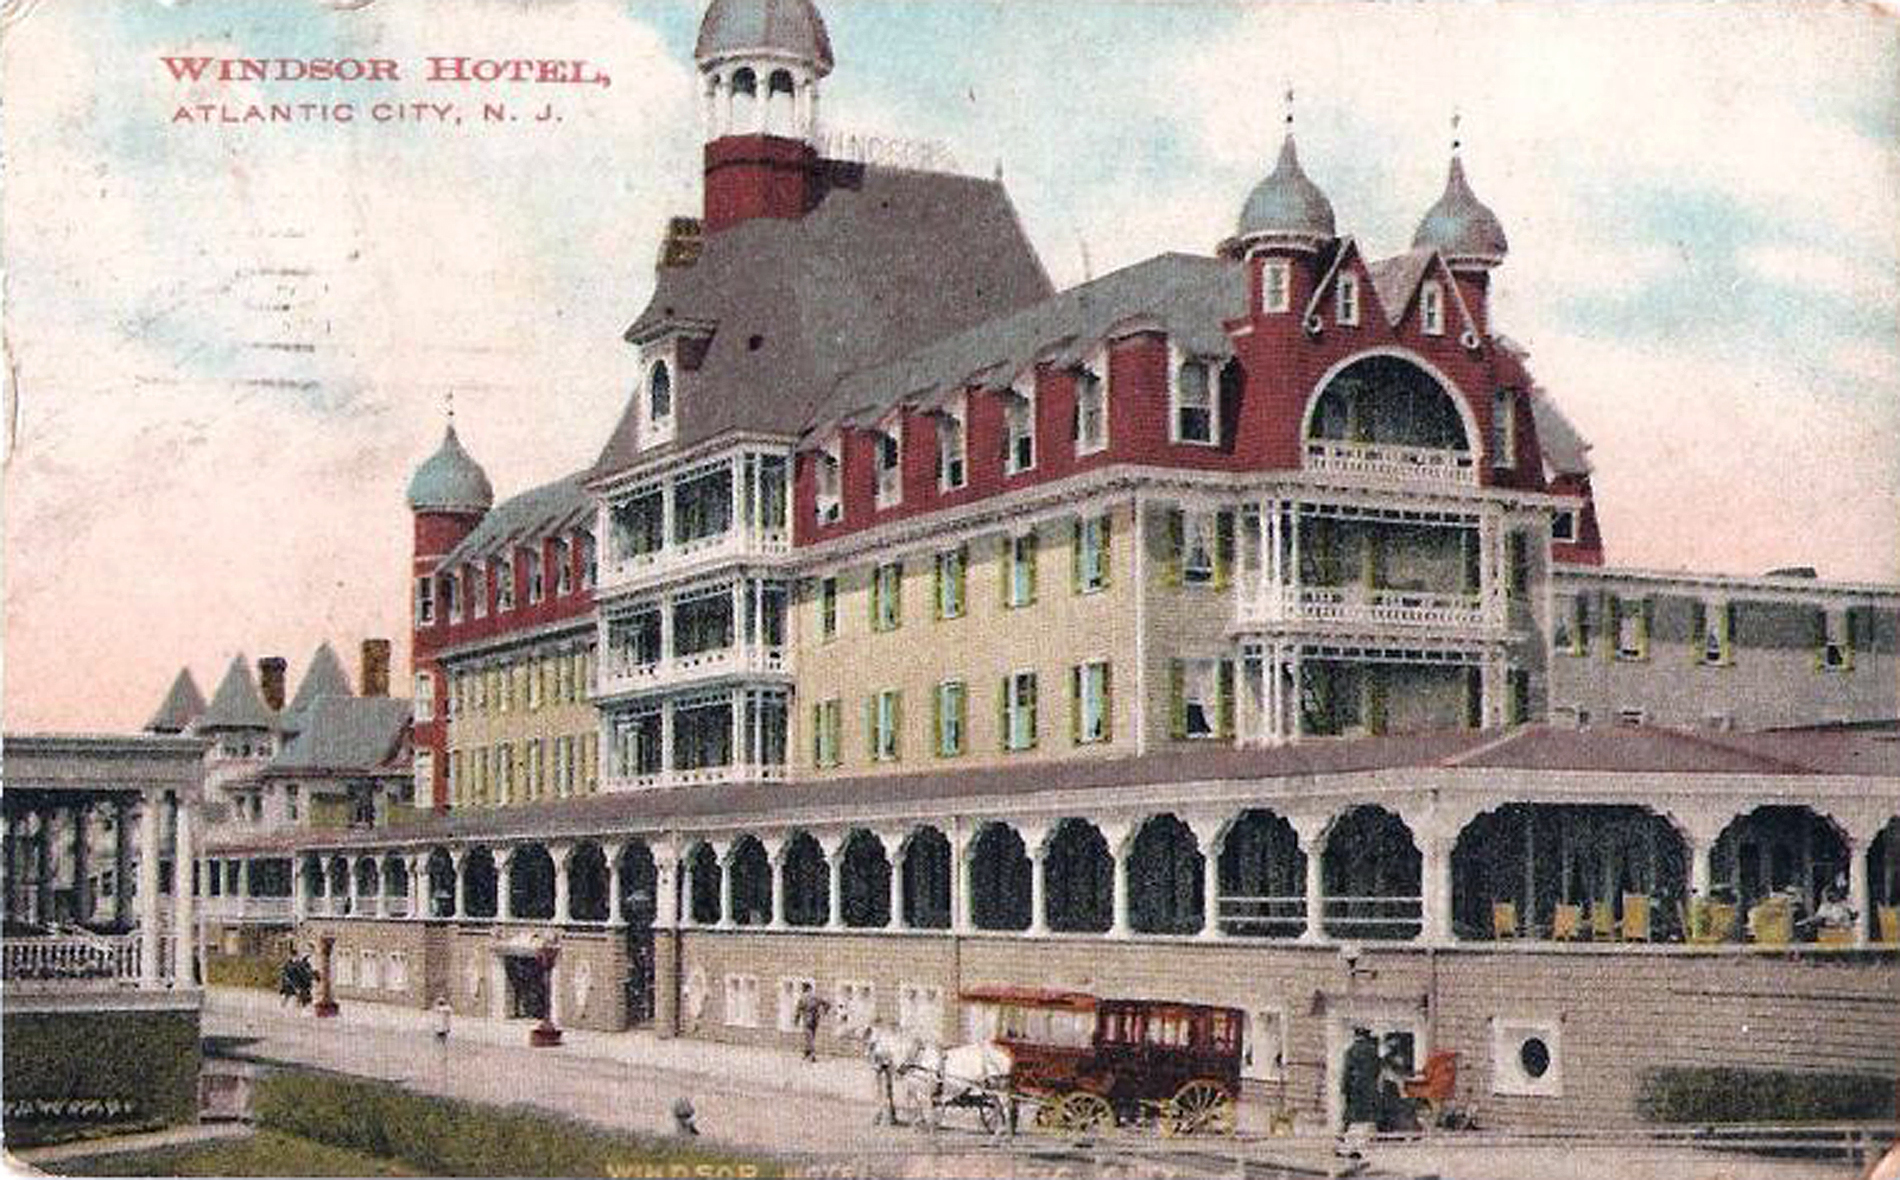 Atlantic City - Windsor Hotel - 1912 | Atlantic City | Old Pictures of ...